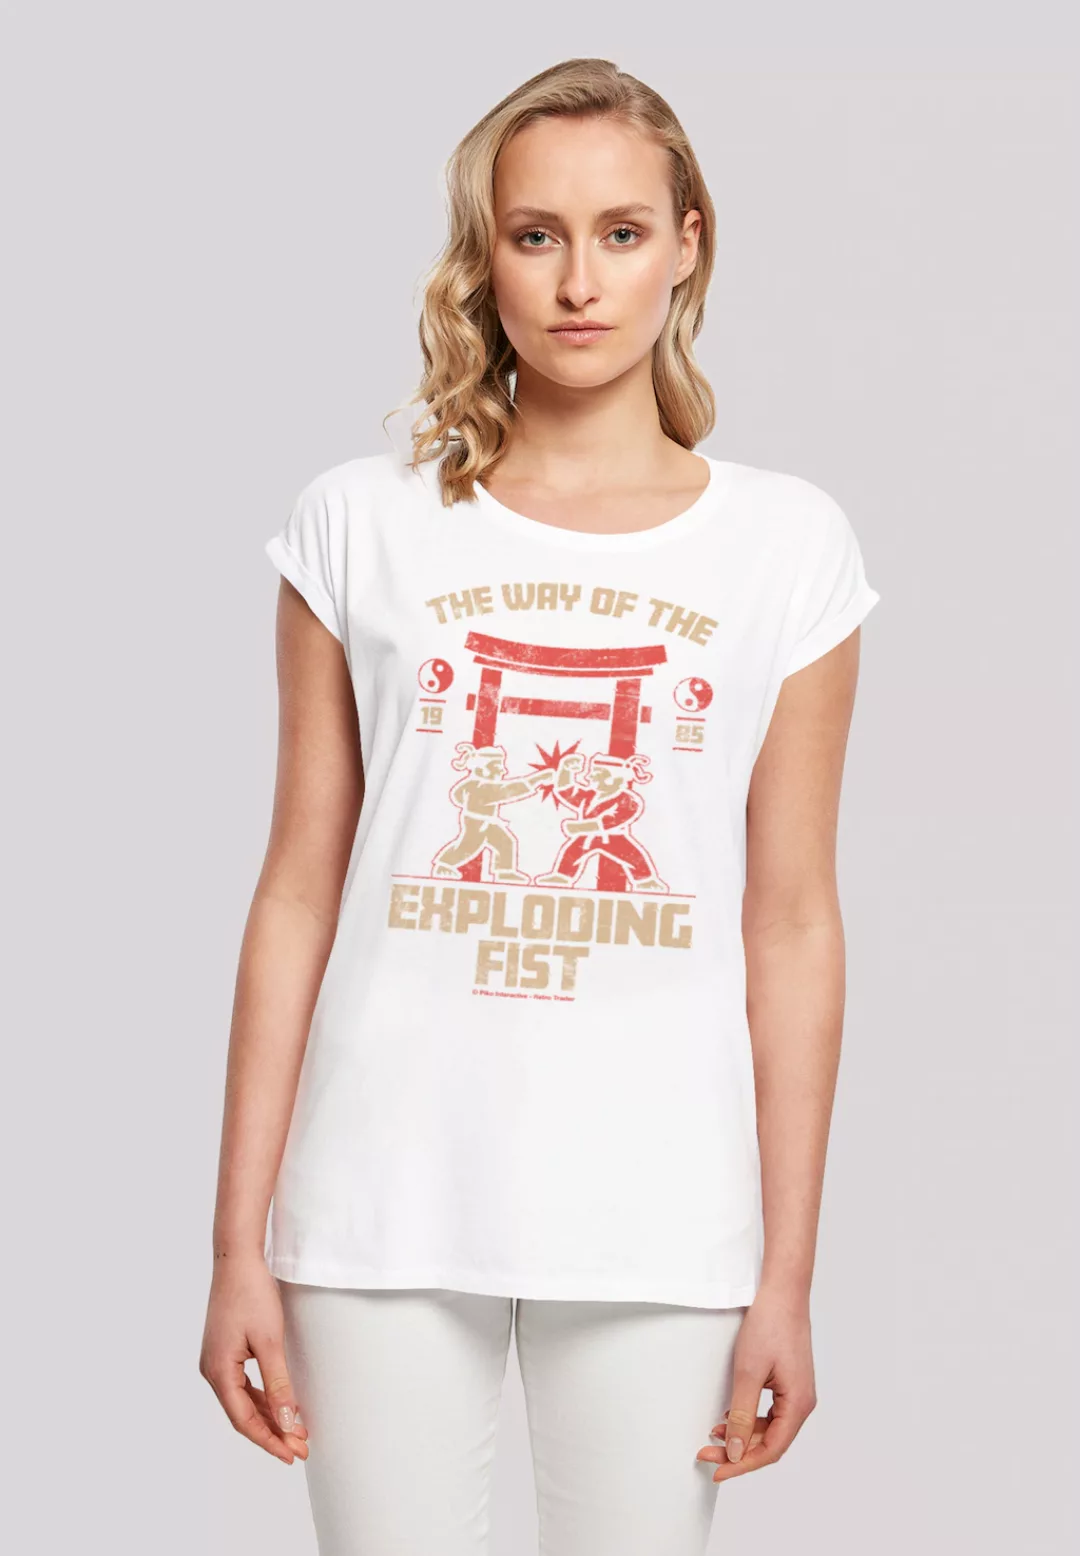 F4NT4STIC T-Shirt "Retro Gaming The Way of the Exploding Fist" günstig online kaufen